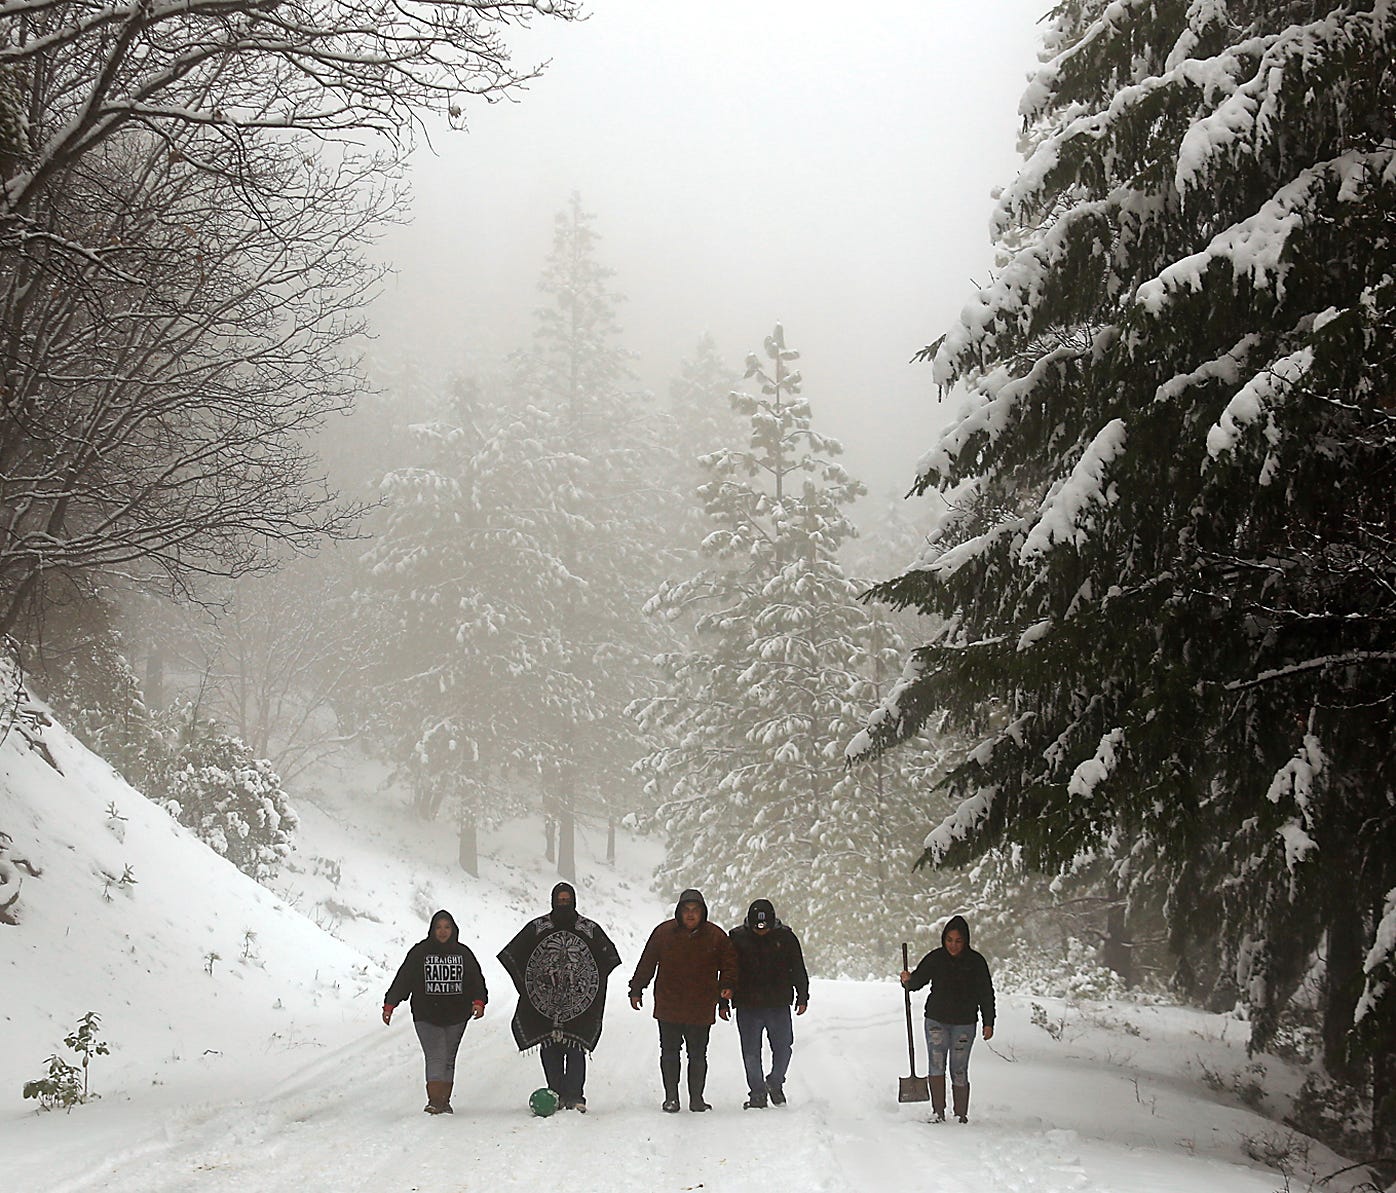 A group of friends from Clearlake, Calif., look for a favorable sledding hill in the Mendocino National Forest, Calif., on Jan. 3, 2017.